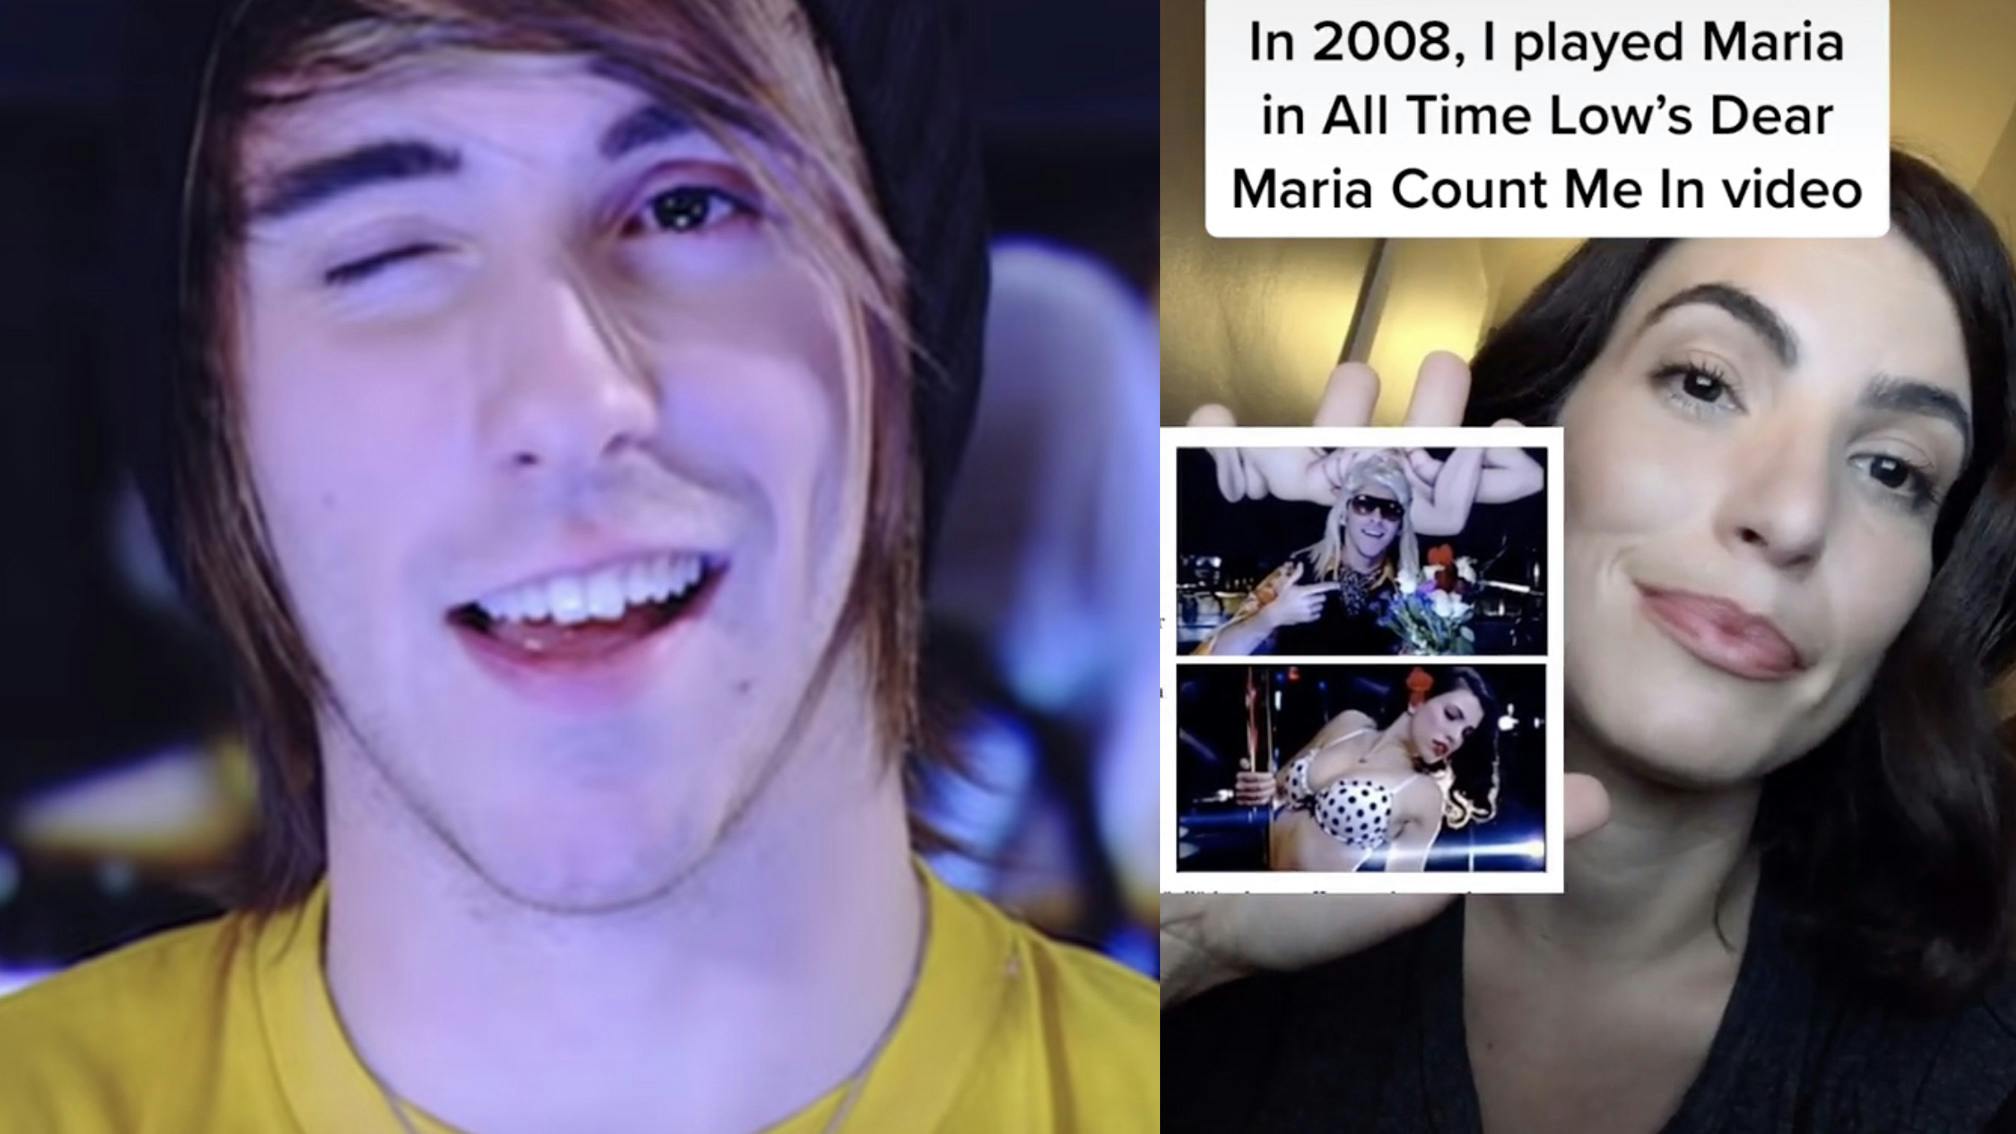 Dear Maria, Count Me In Actress Posts Throwback TikTok About All Time Low's Iconic Video